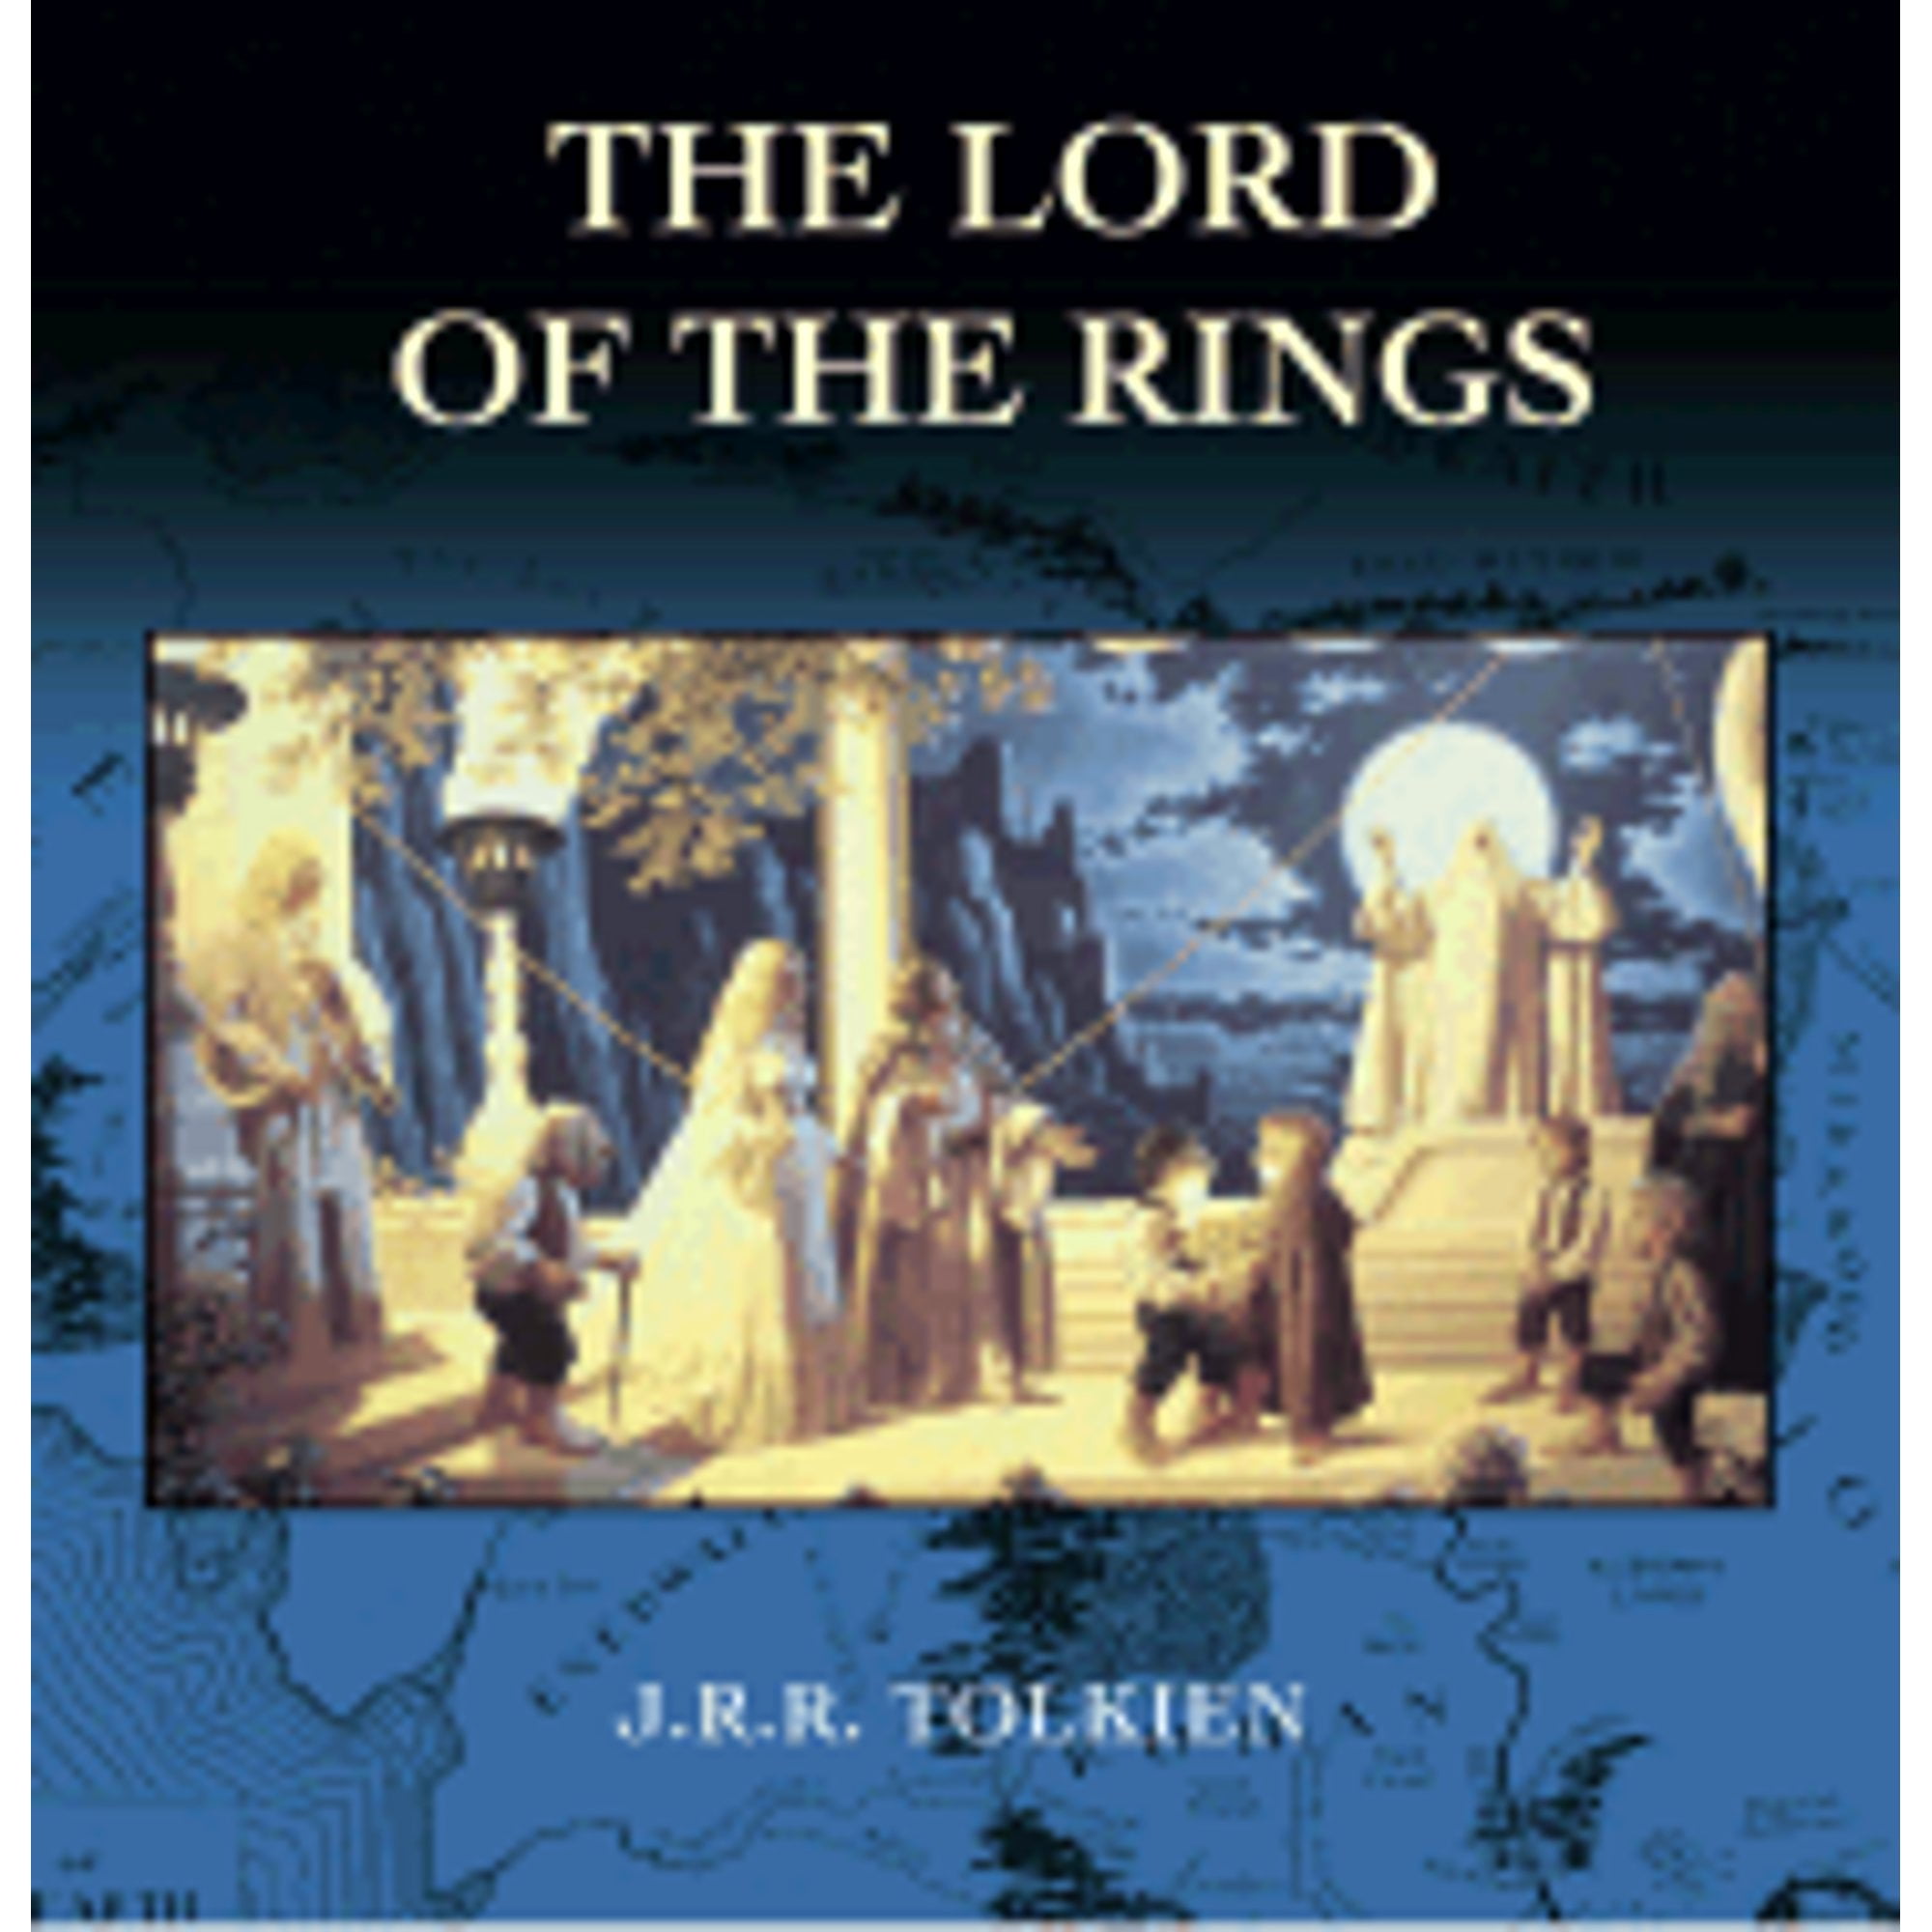 LORD OF THE Rings | The Fellowship of the Ring JRR Tolkien: Audiobook  Unabridged £17.00 - PicClick UK